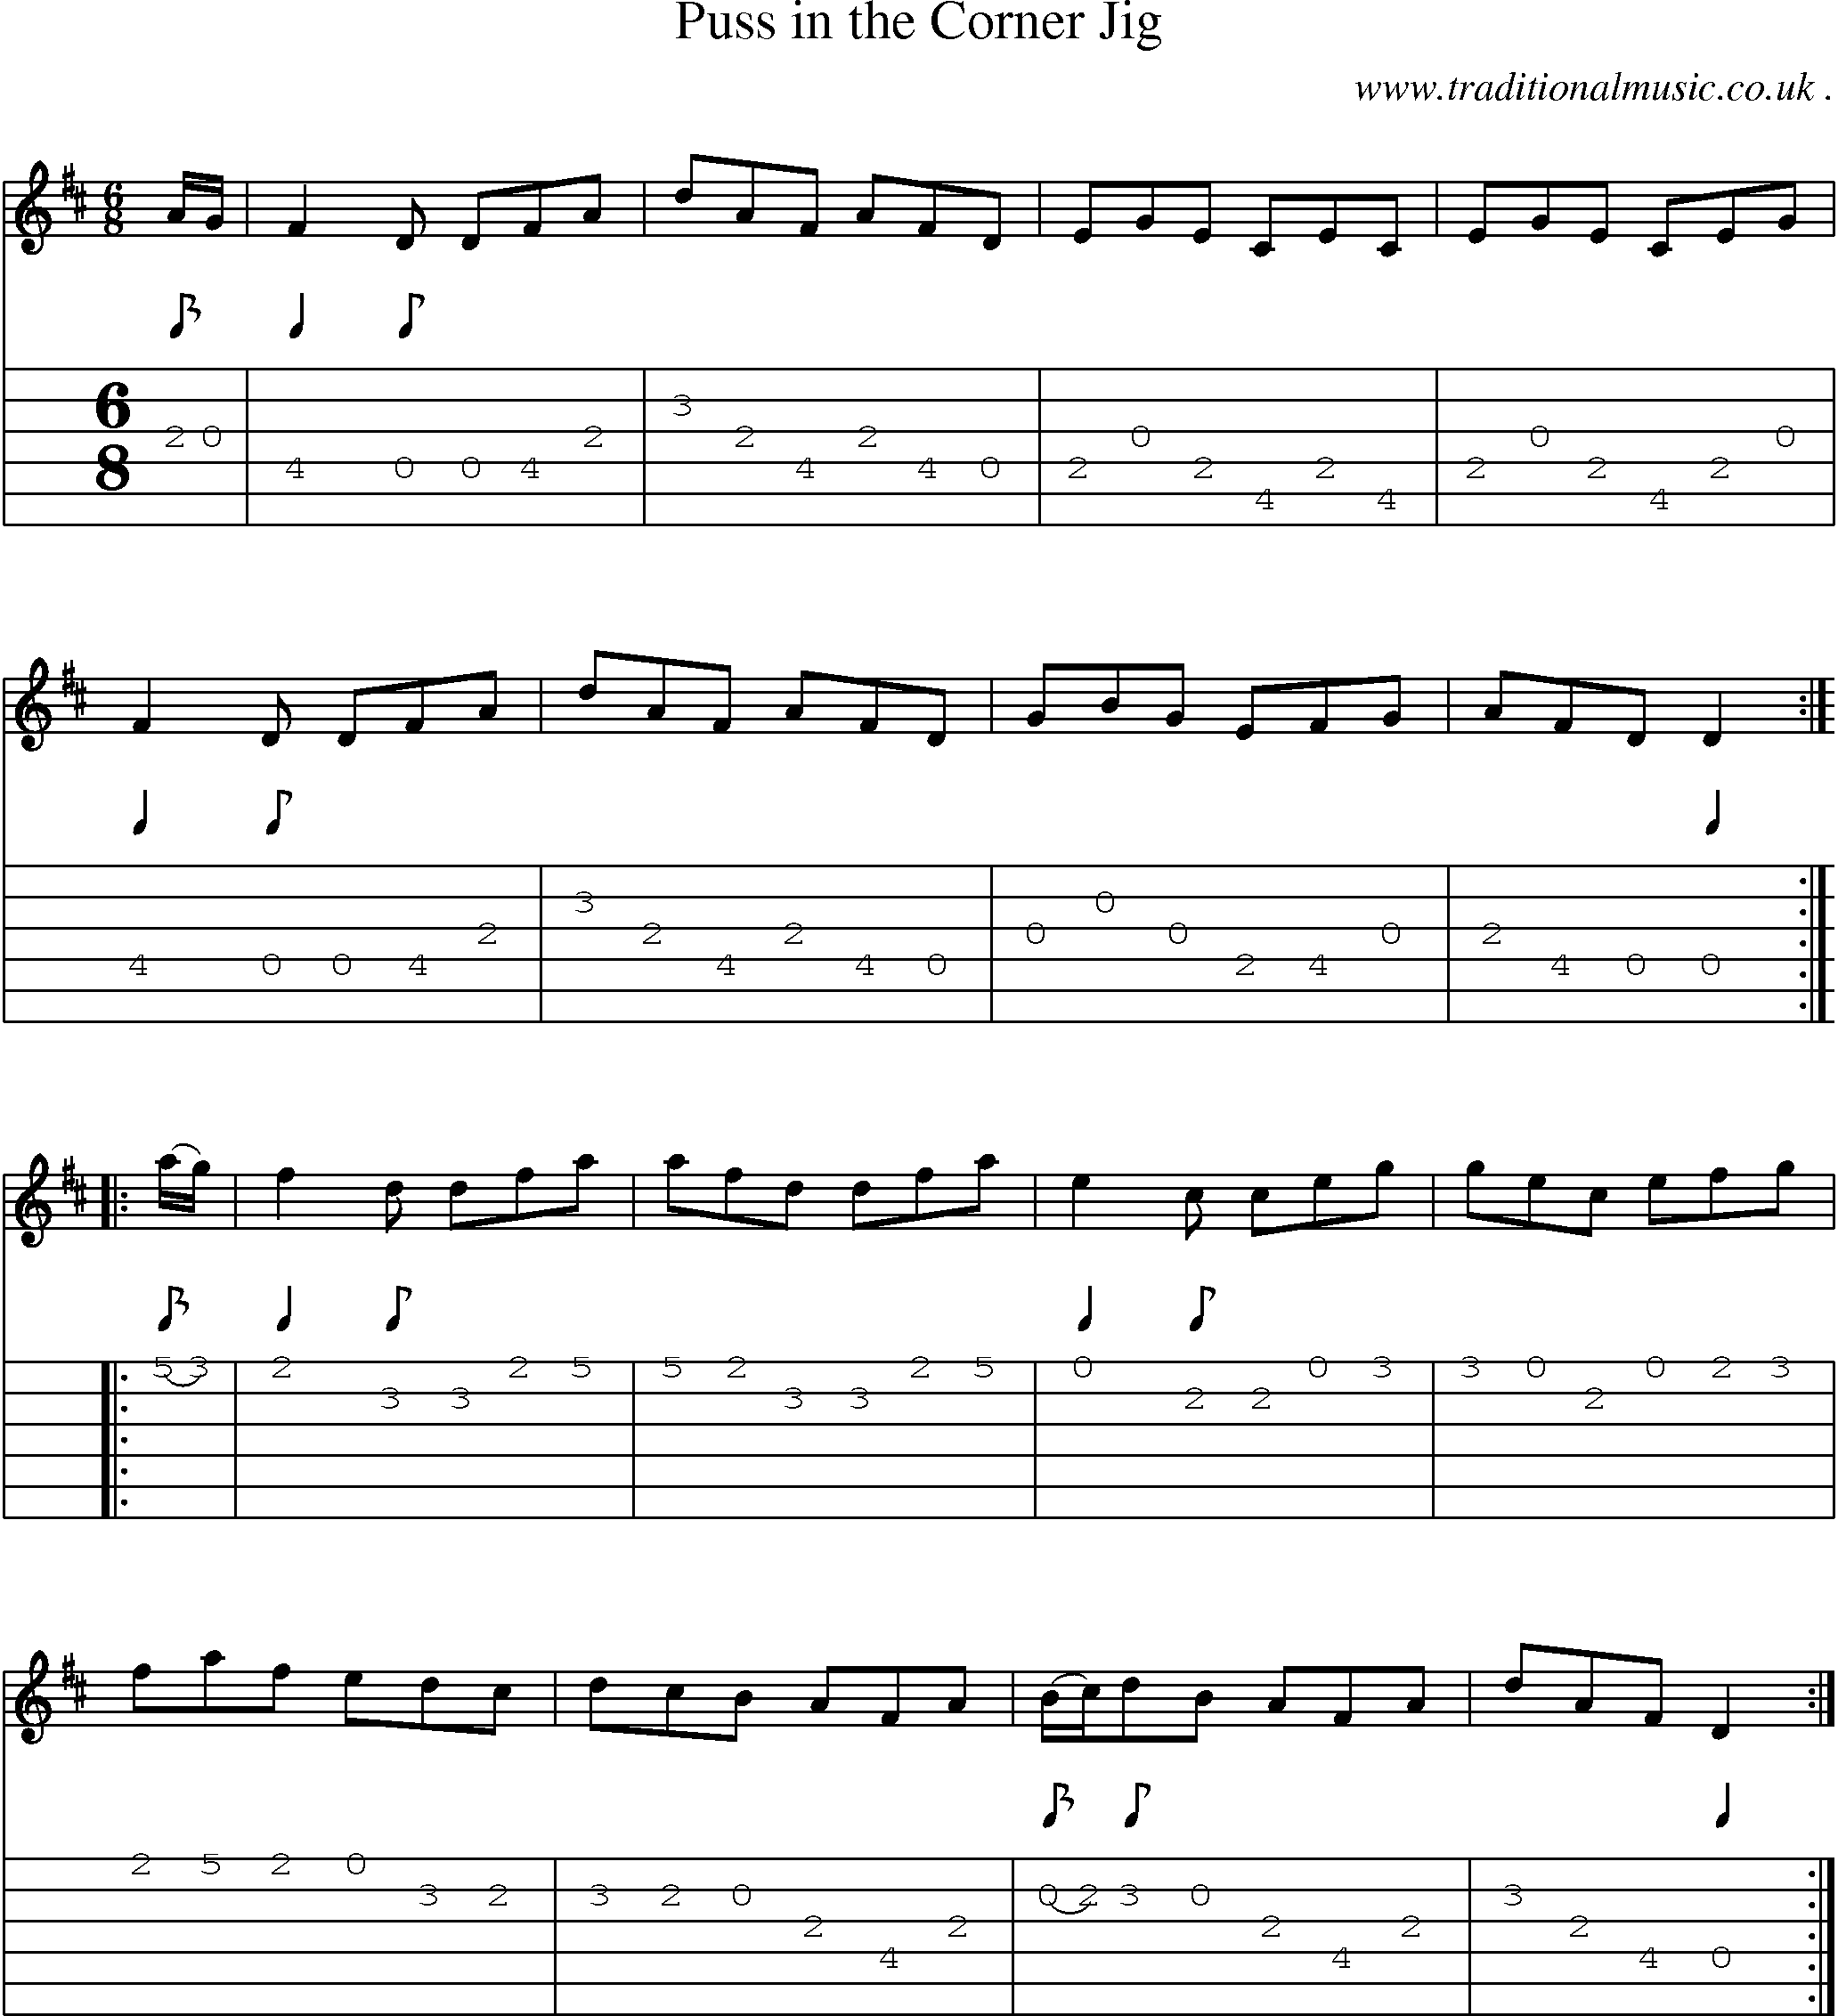 Sheet-Music and Guitar Tabs for Puss In The Corner Jig